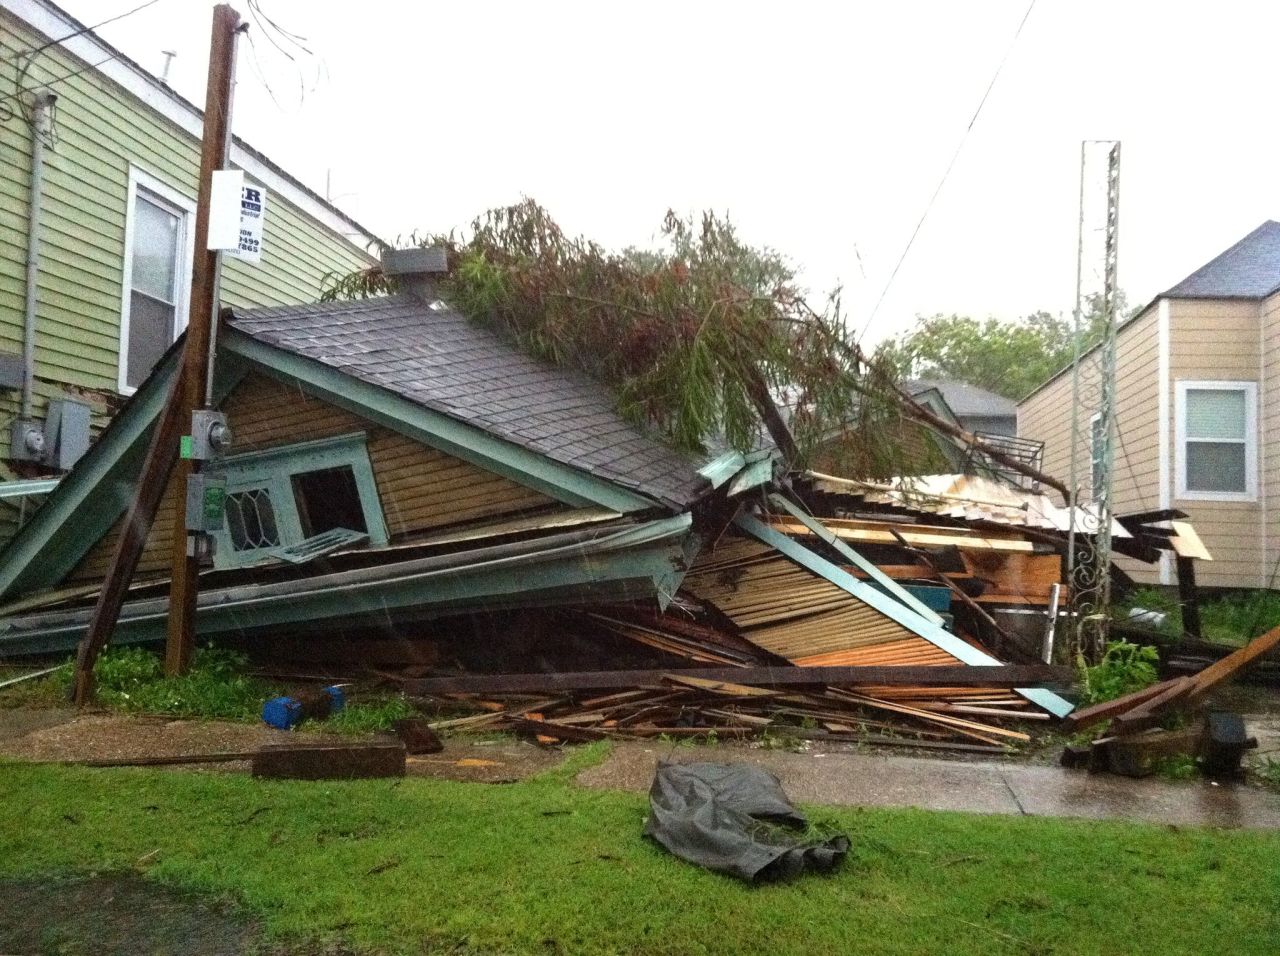 Many homes like this one collapsed in <a href="http://ireport.cnn.com/docs/DOC-834570">New Orleans, Louisiana</a> after Hurricane Isaac hit in August. Eileen Romero was completely shocked when she came upon the scene only a block away from her home in New Orleans' Mid-City neighborhood. 